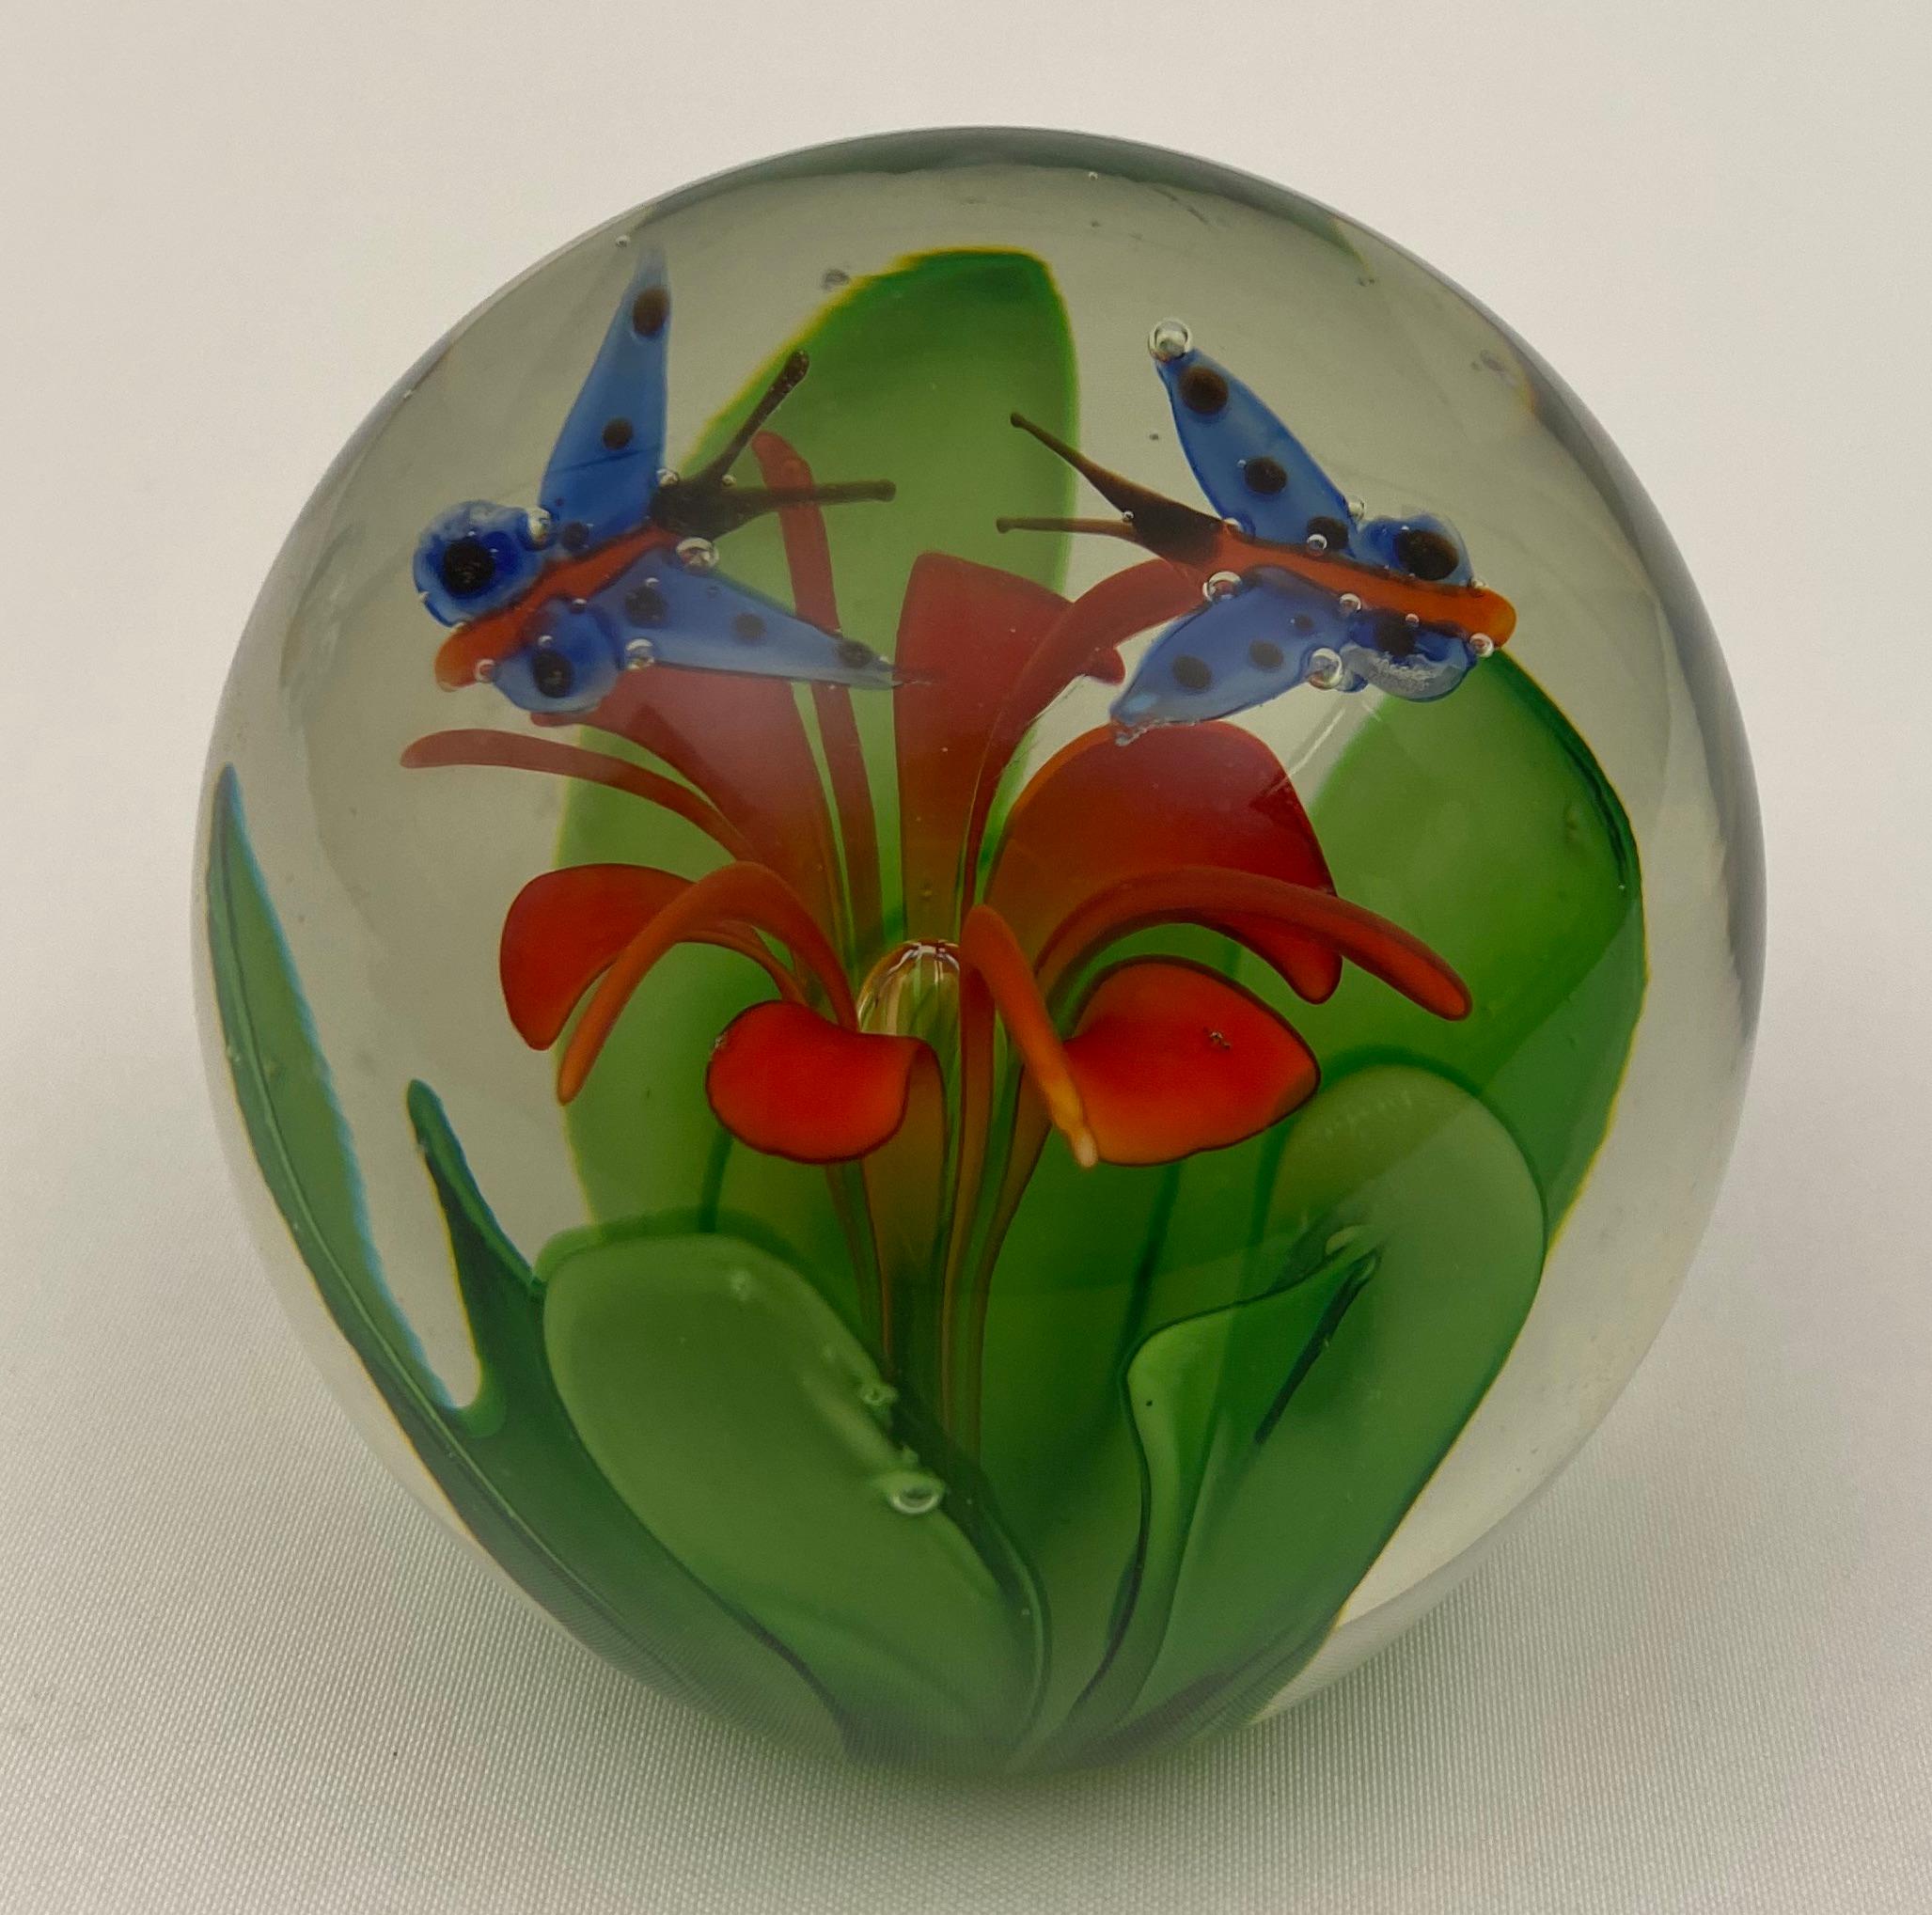 A magnificent limited edition paperweight attributed to Fratelli Toso.  Large and showy with great bright colors of red, blue and green.

Approximately 3 inches in diameter by 3 inches in height

Will enhance any desk or table. 